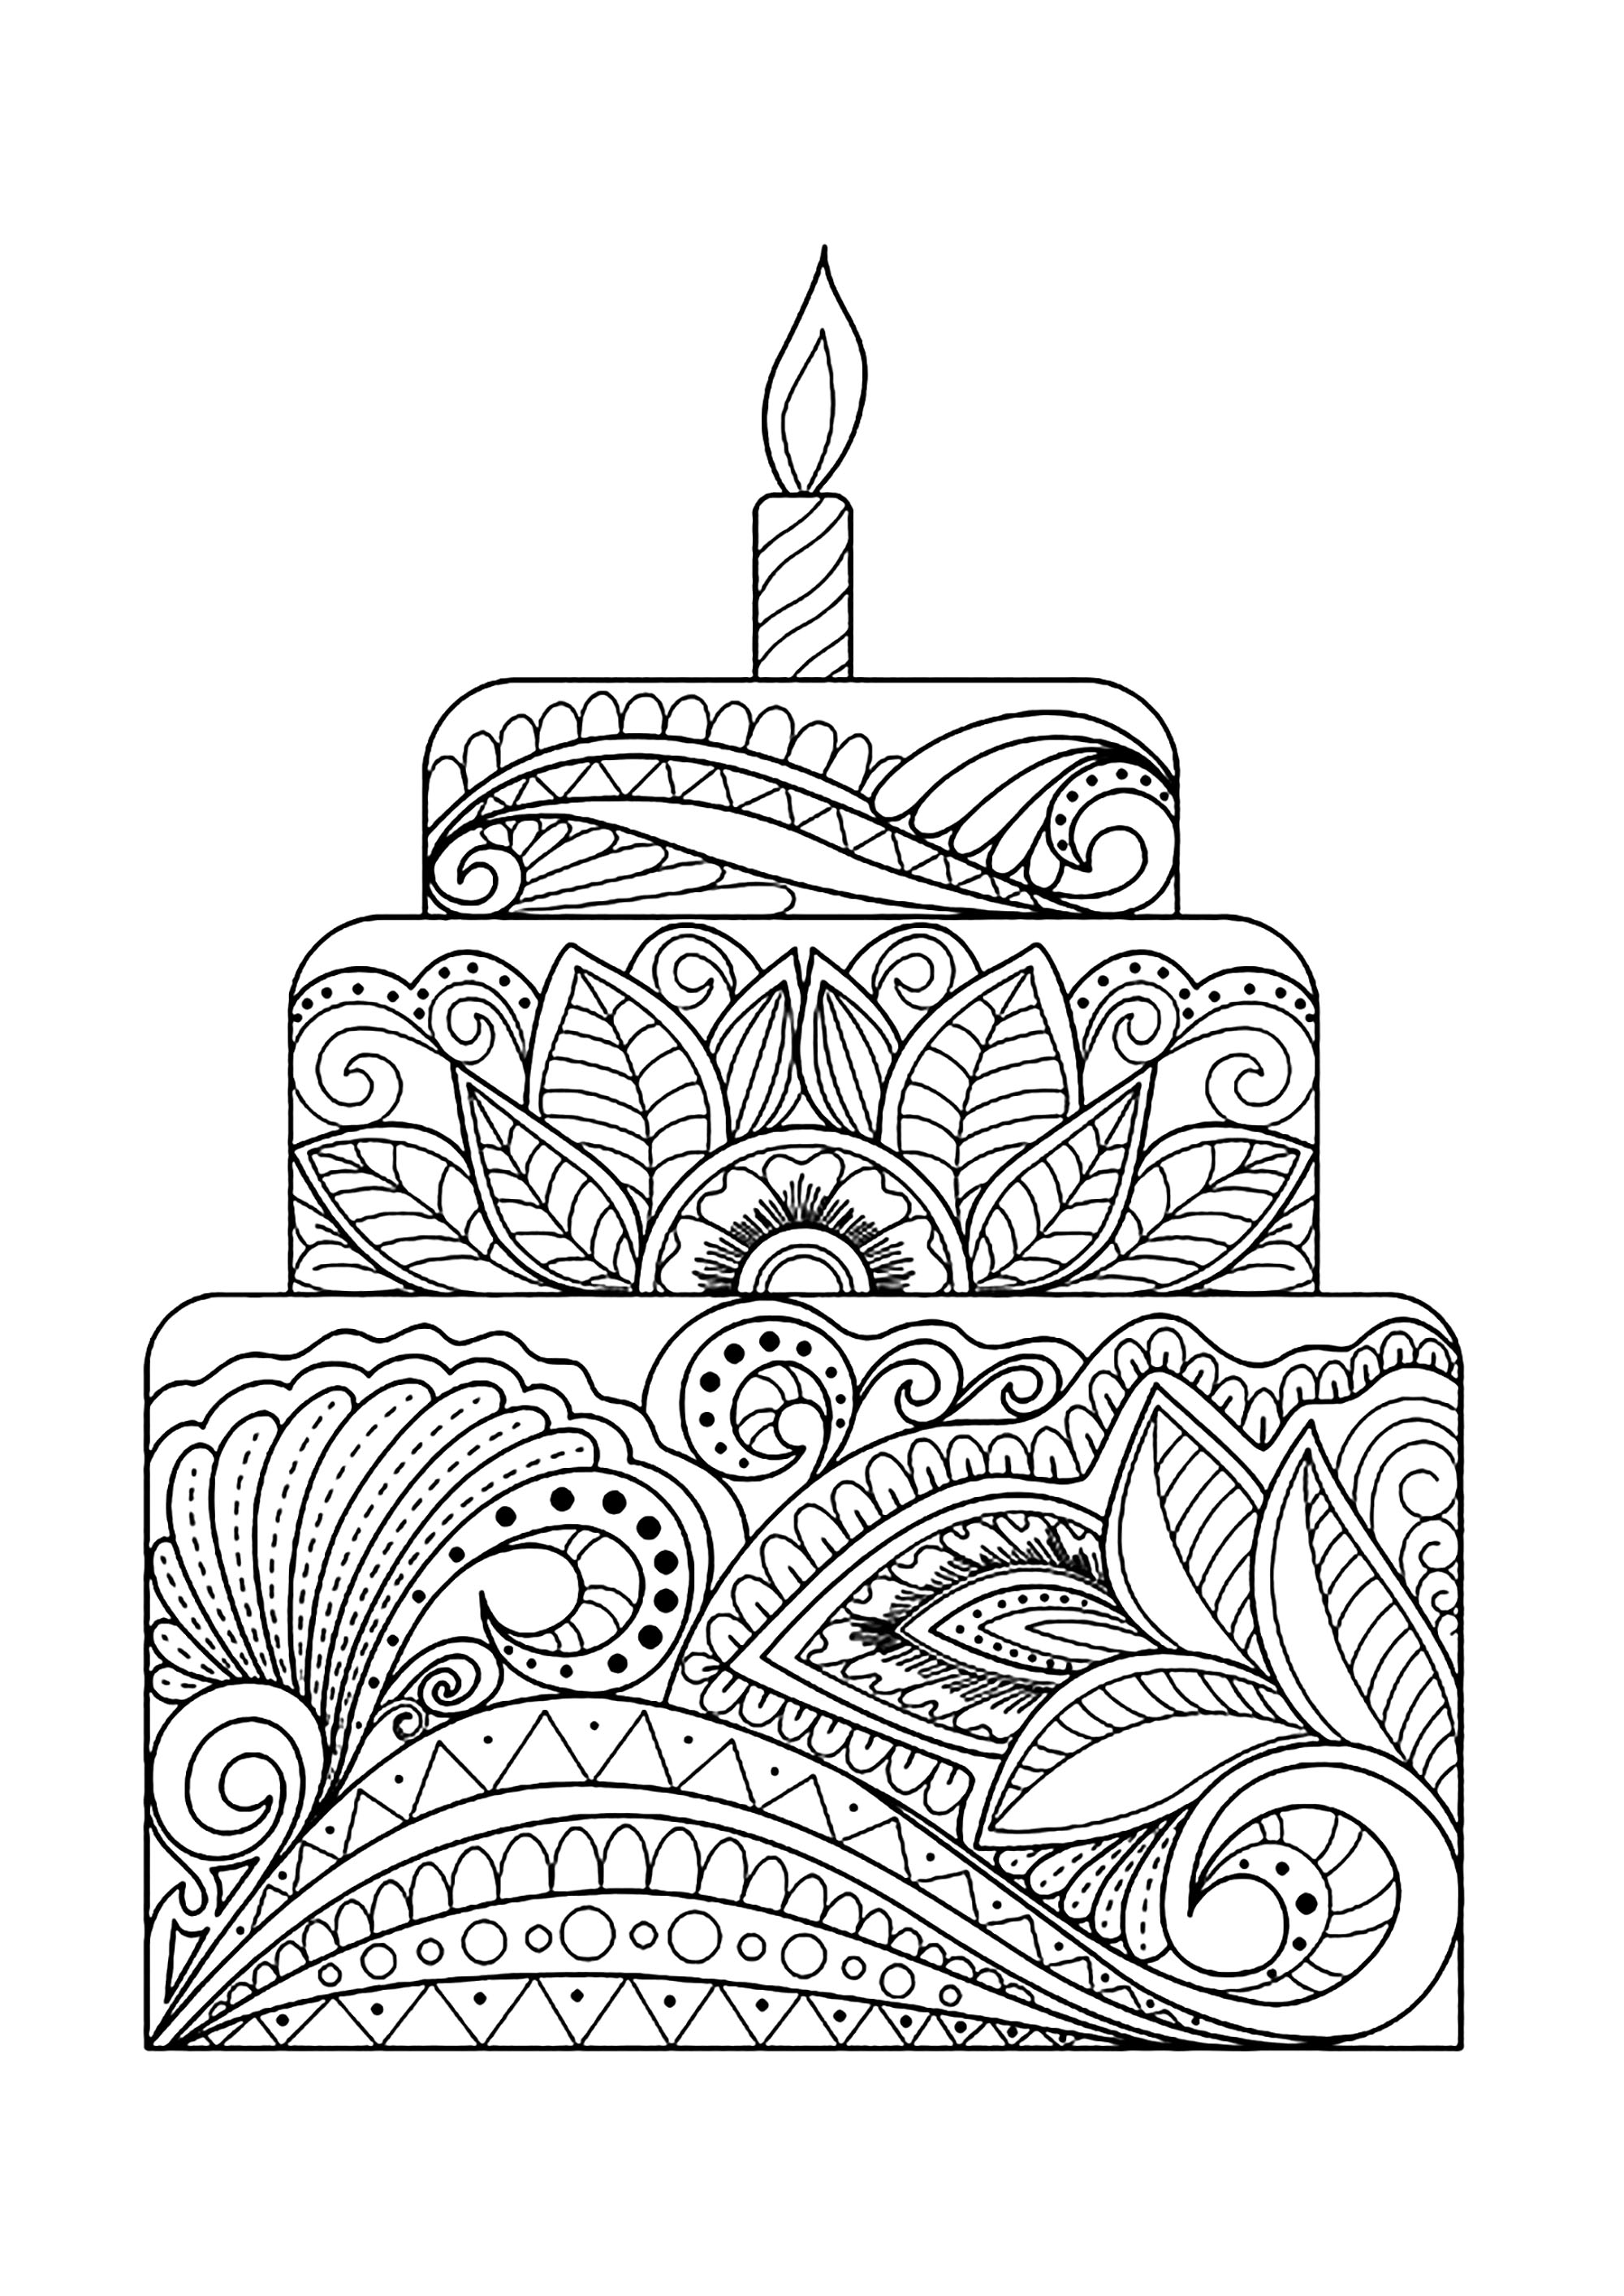 Big flowery cake - Cupcakes Adult Coloring Pages